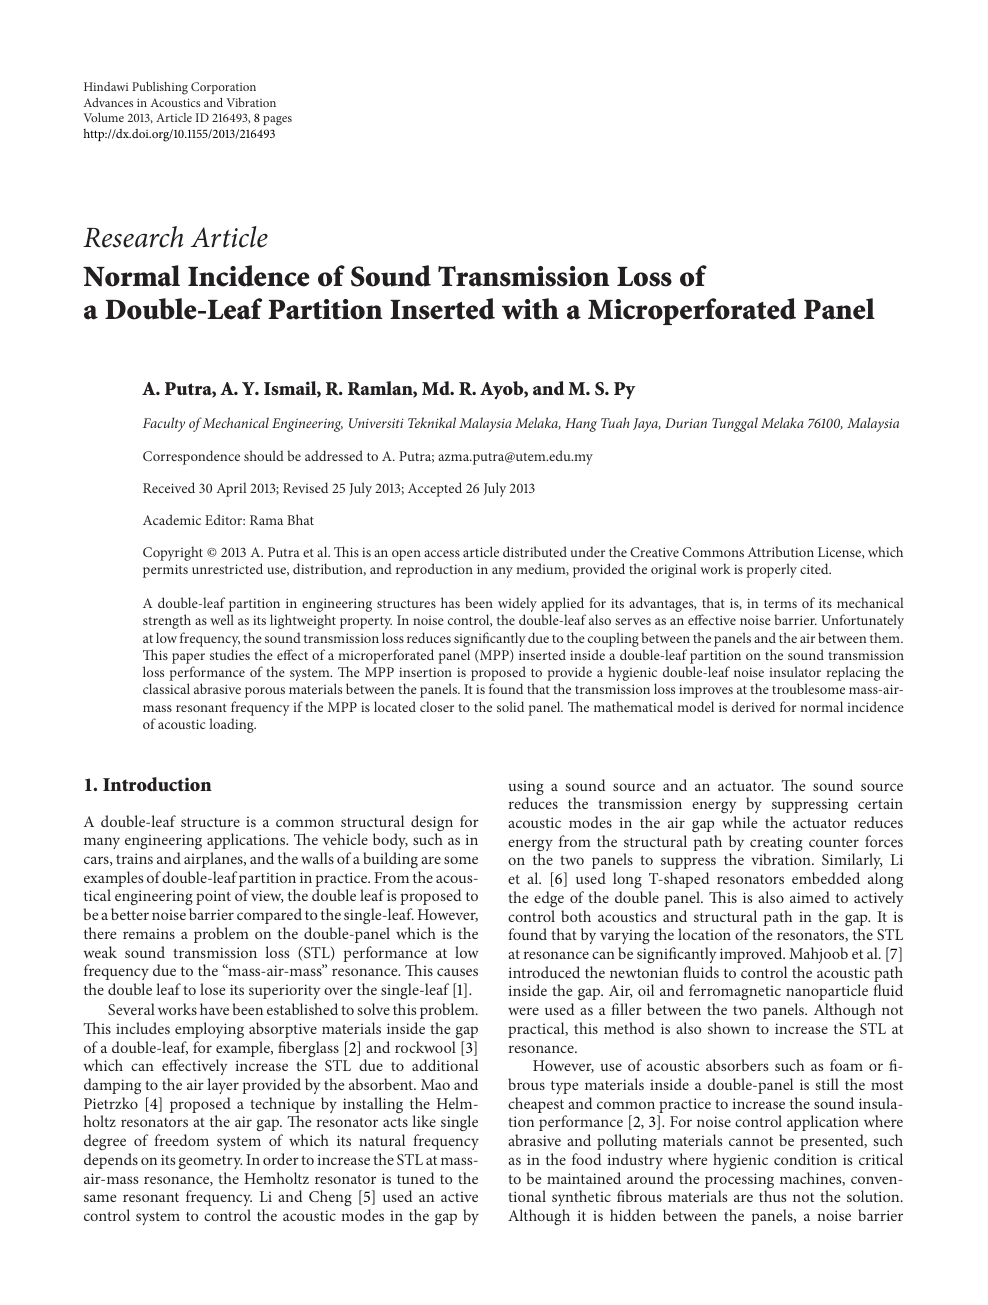 Normal Incidence Of Sound Transmission Loss Of A Double Leaf Partition Inserted With A Microperforated Panel Topic Of Research Paper In Nano Technology Download Scholarly Article Pdf And Read For Free On Cyberleninka